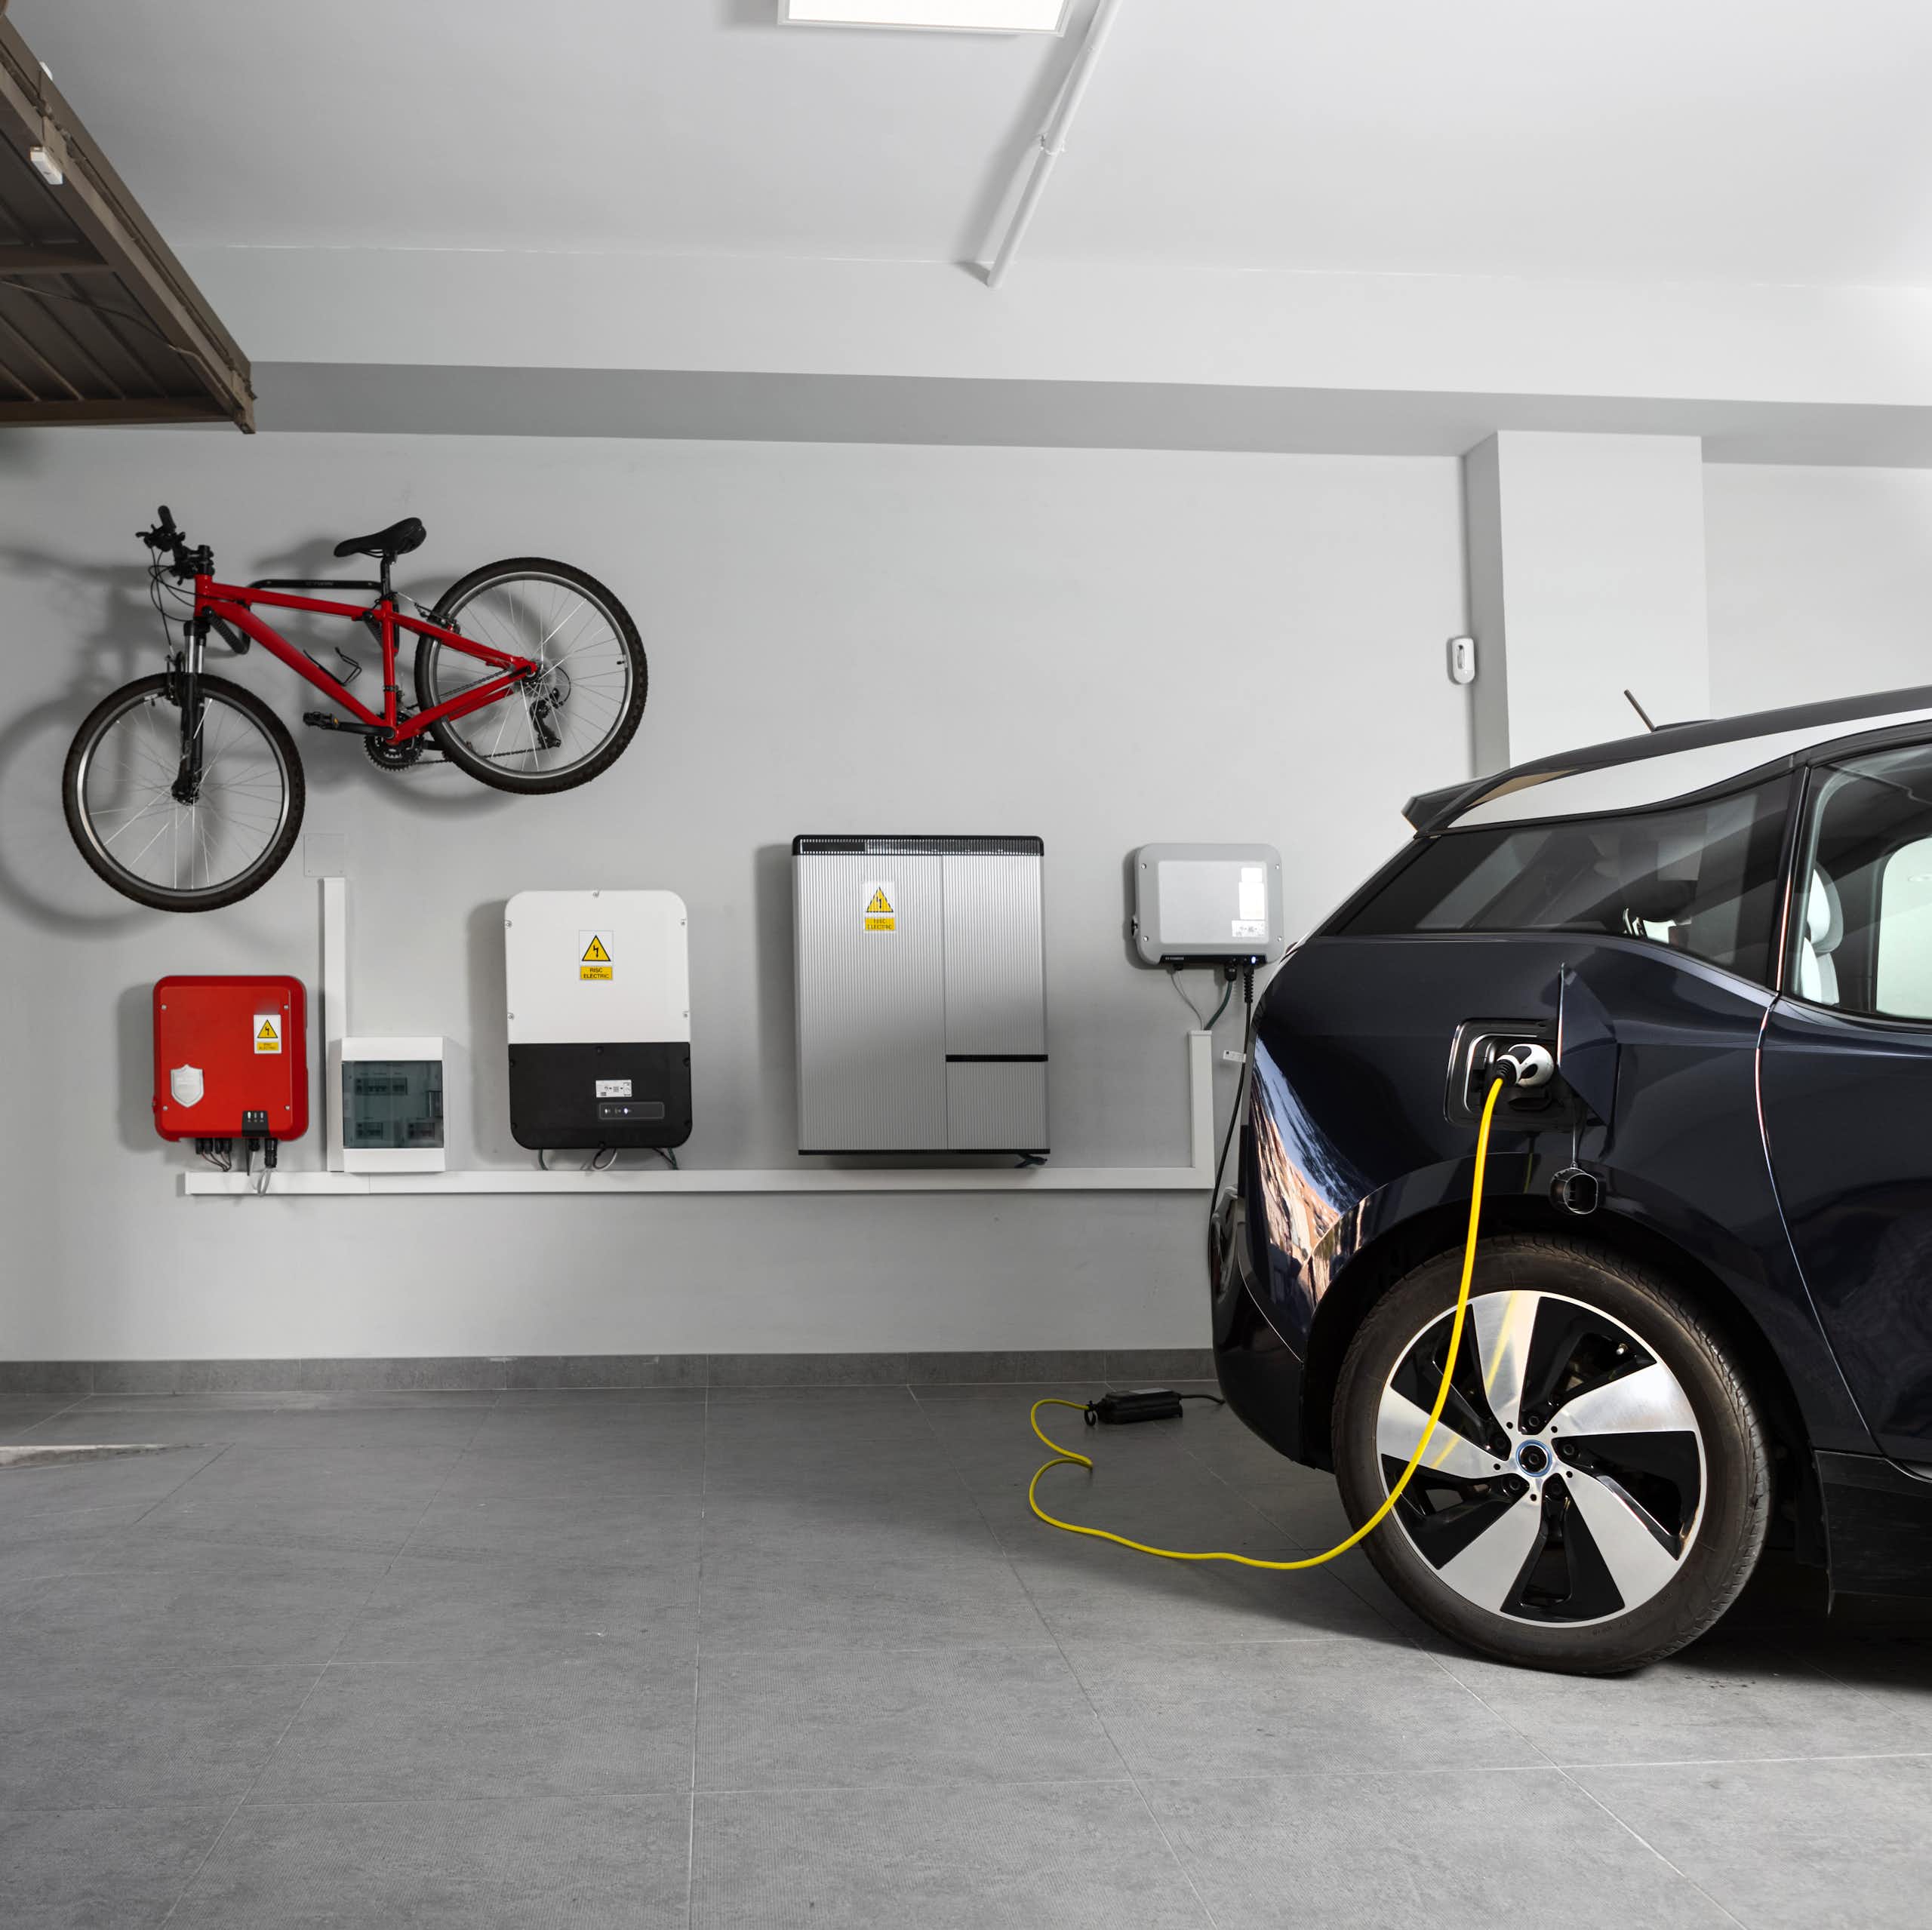 Home battery and EV charging station in a garage, with a bike stored on the wall